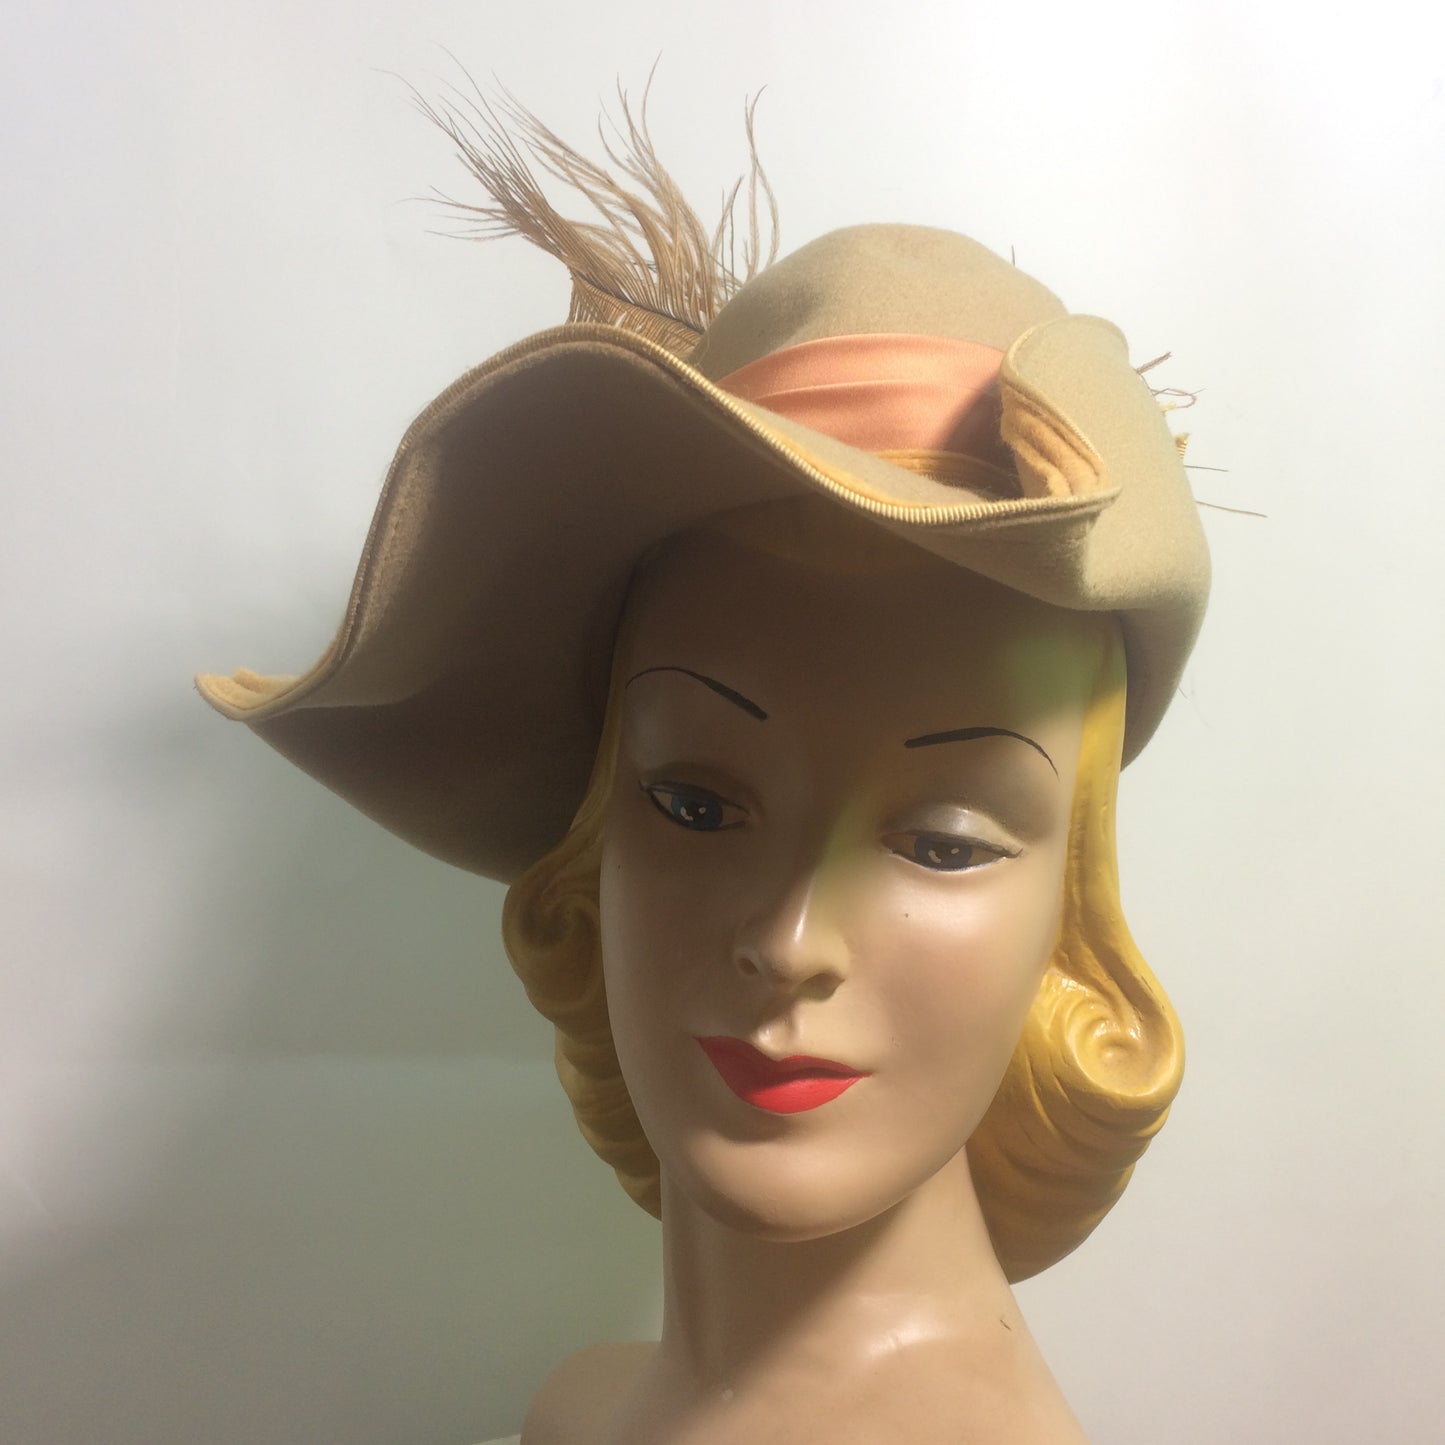 Jaunty Tan Structured Wool Hat w/ Feathers Turned up Brim circa 1960s